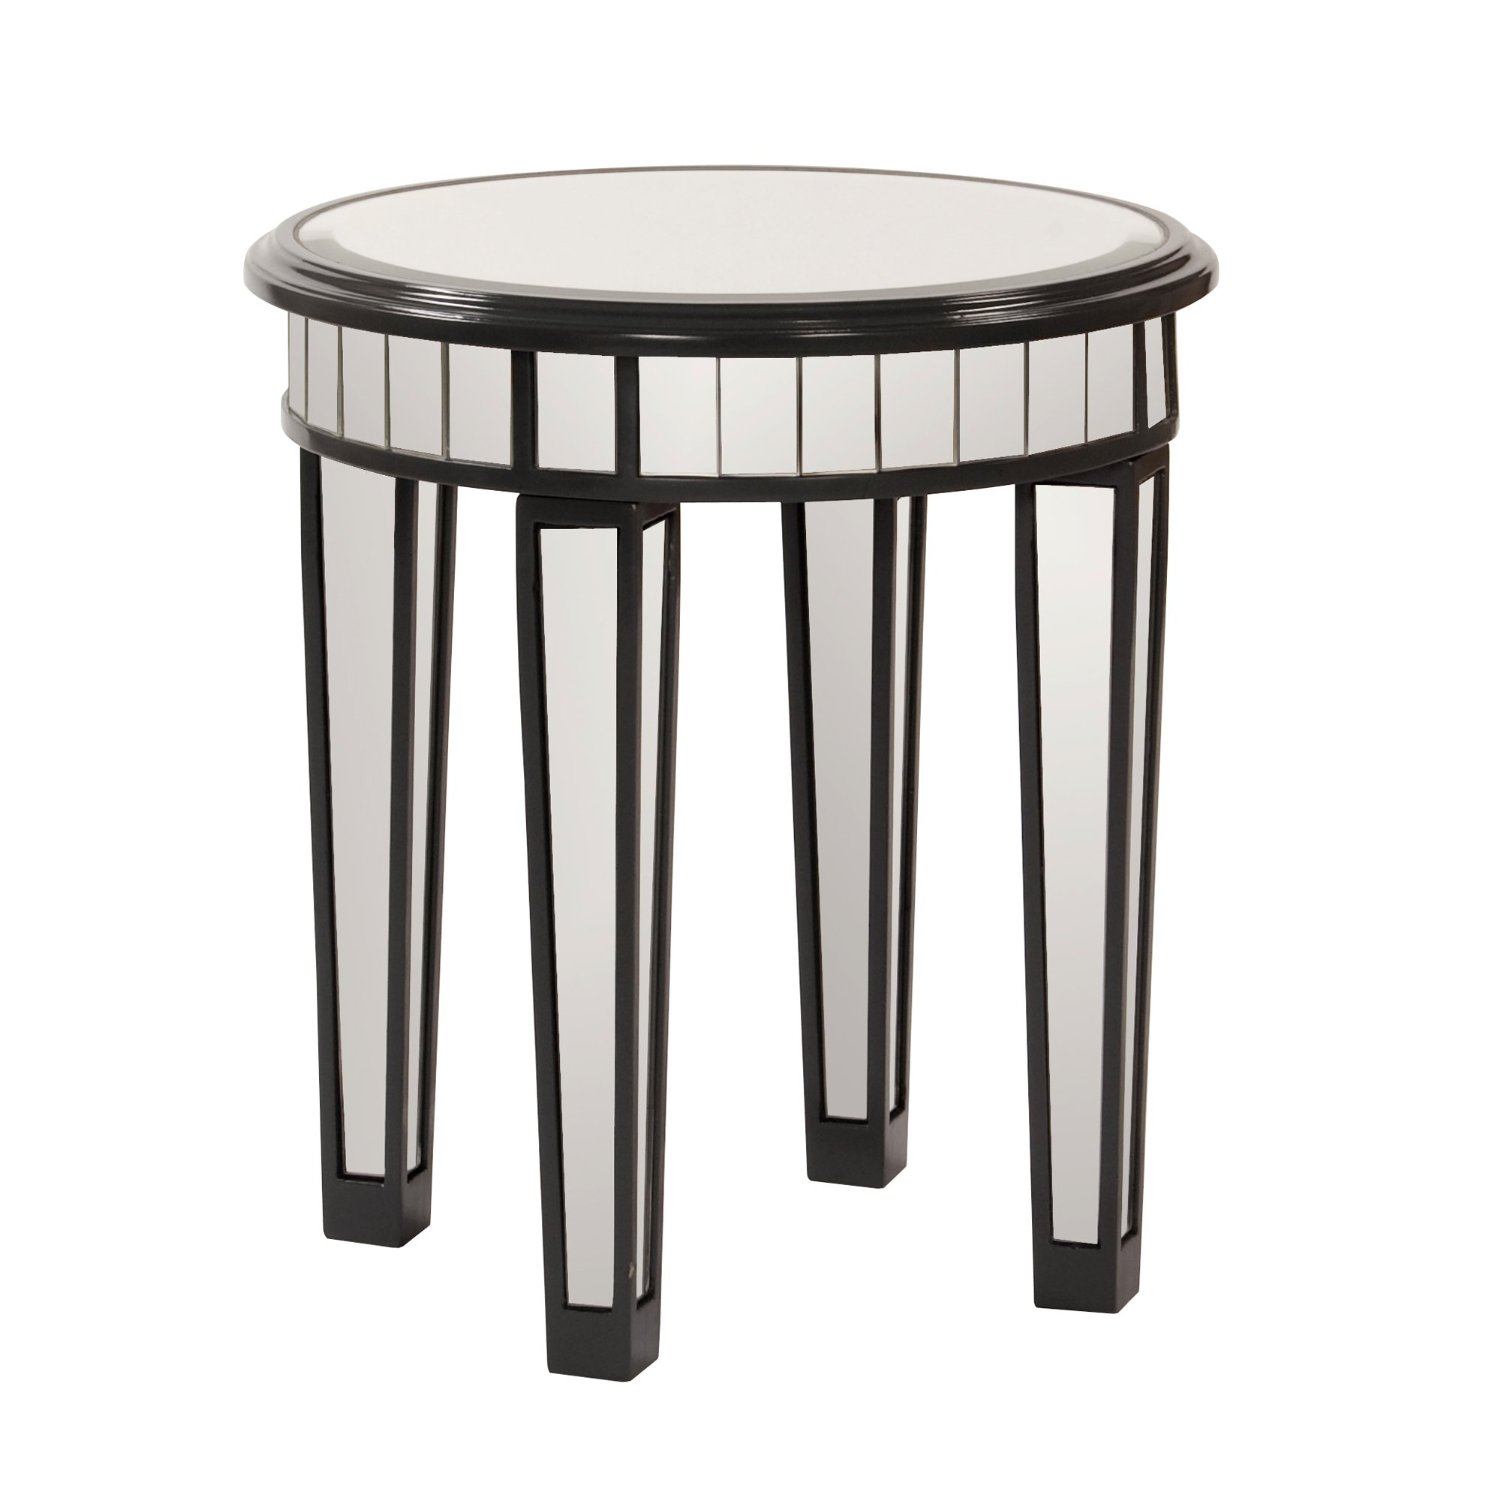 round mirrored accent table with legs and black wooden covers small oval brass glass coffee sofa side height whole lighting fixtures hampton bay wicker furniture kitchen cabinets